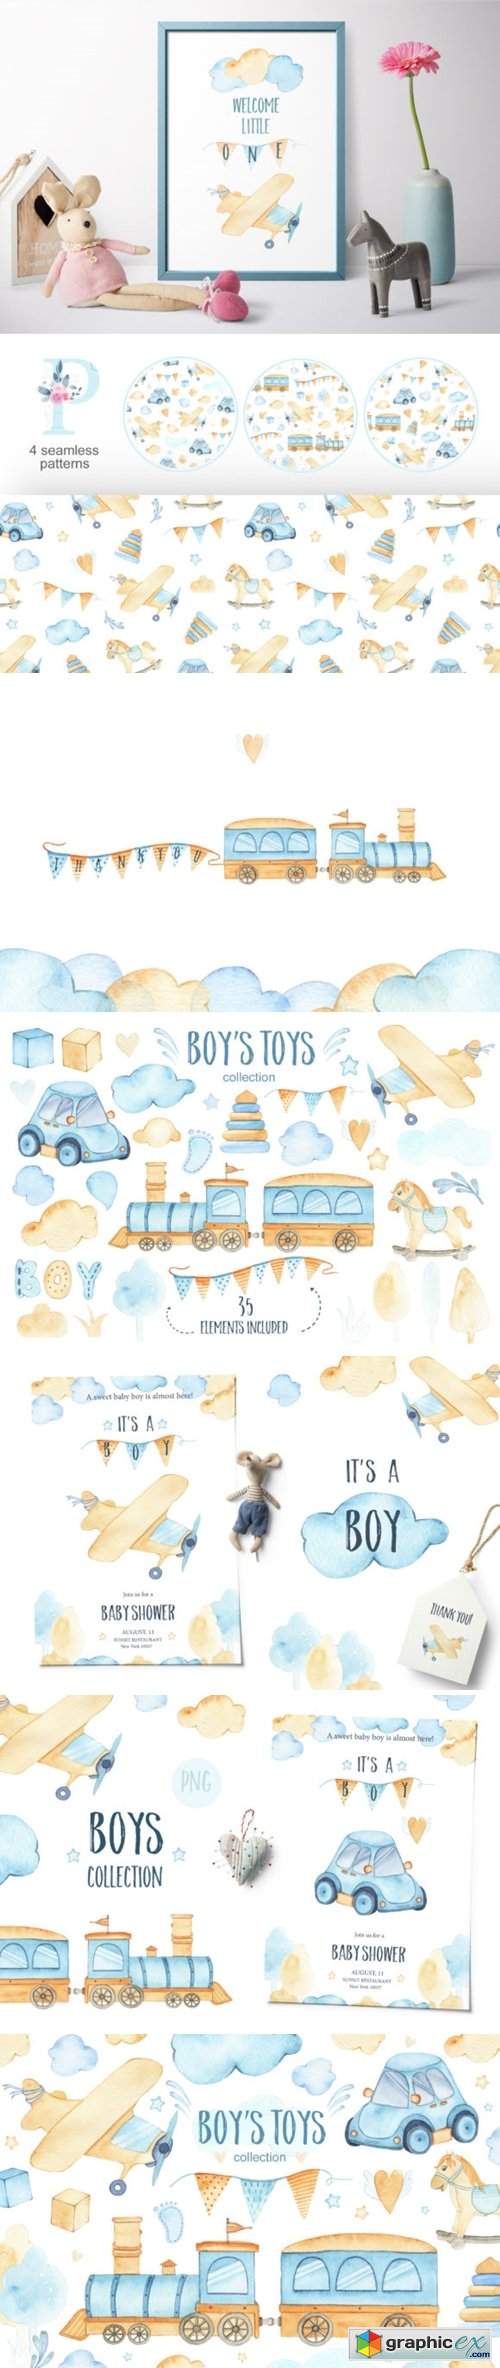  Boy's Toys - Watercolor Collection 